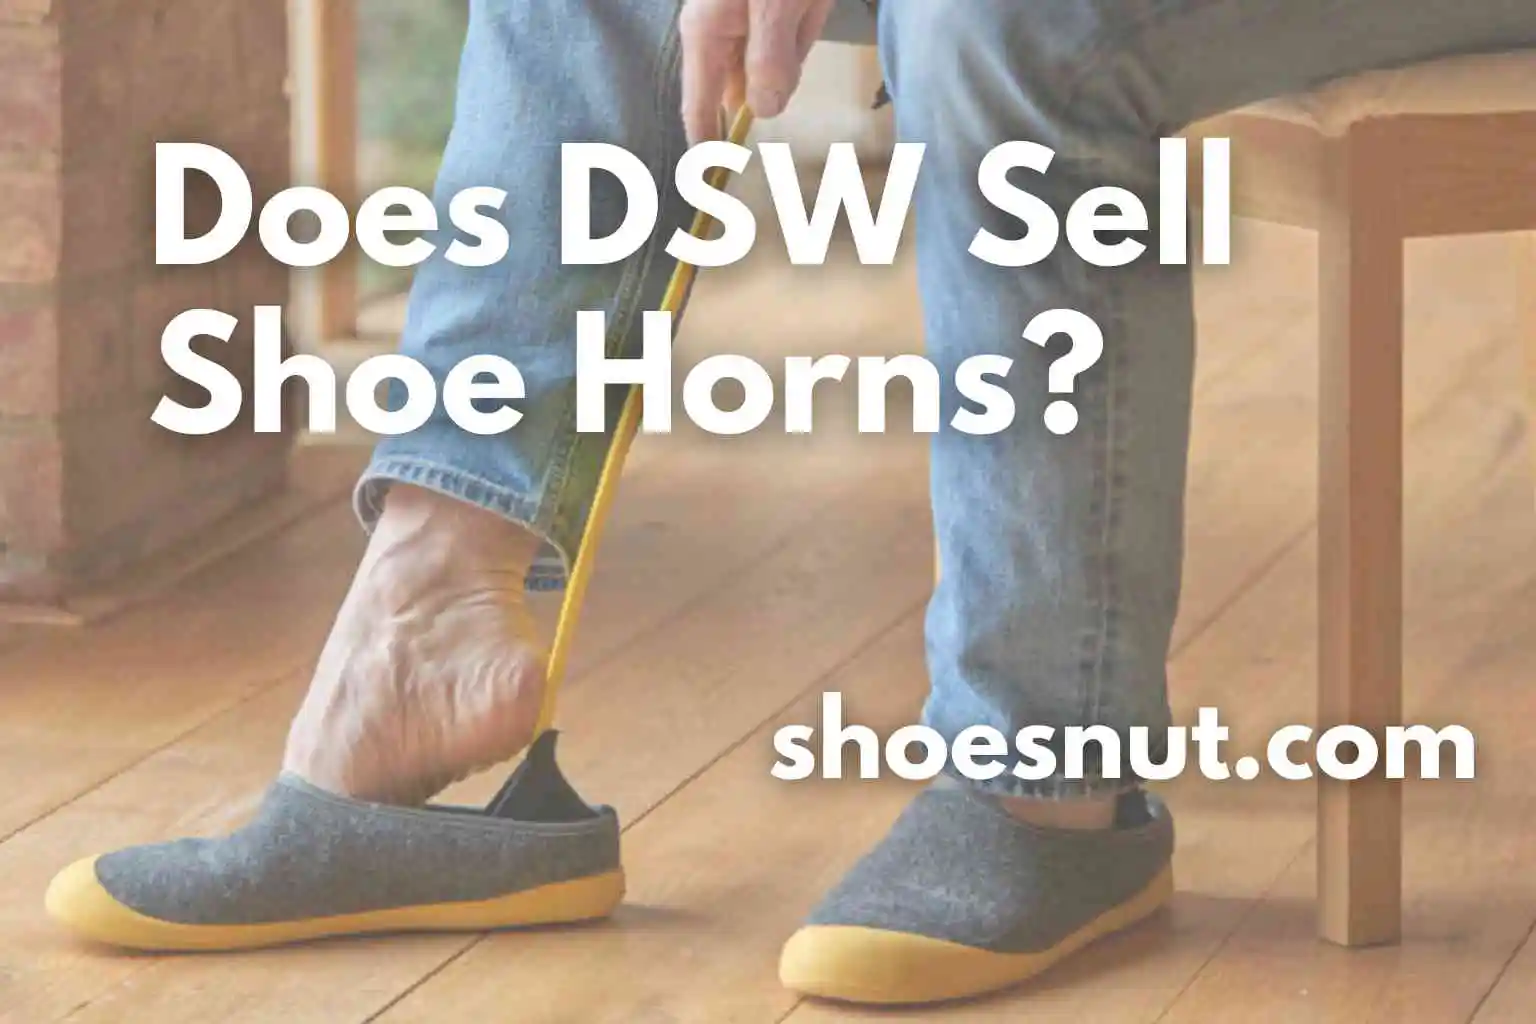 Does DSW Sell Shoe Horns?